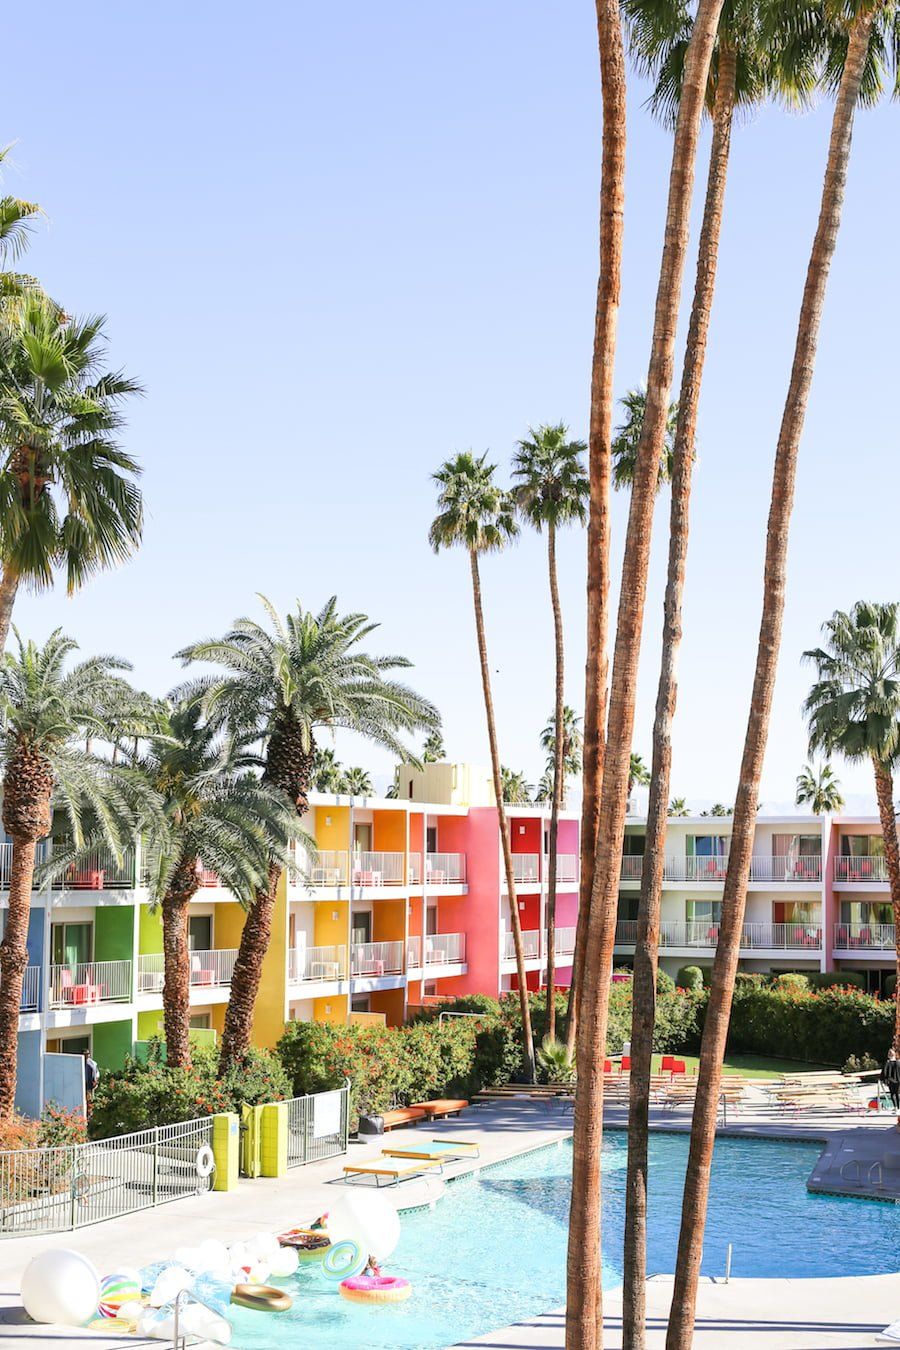 My Ultimate Palm Springs Travel Guide